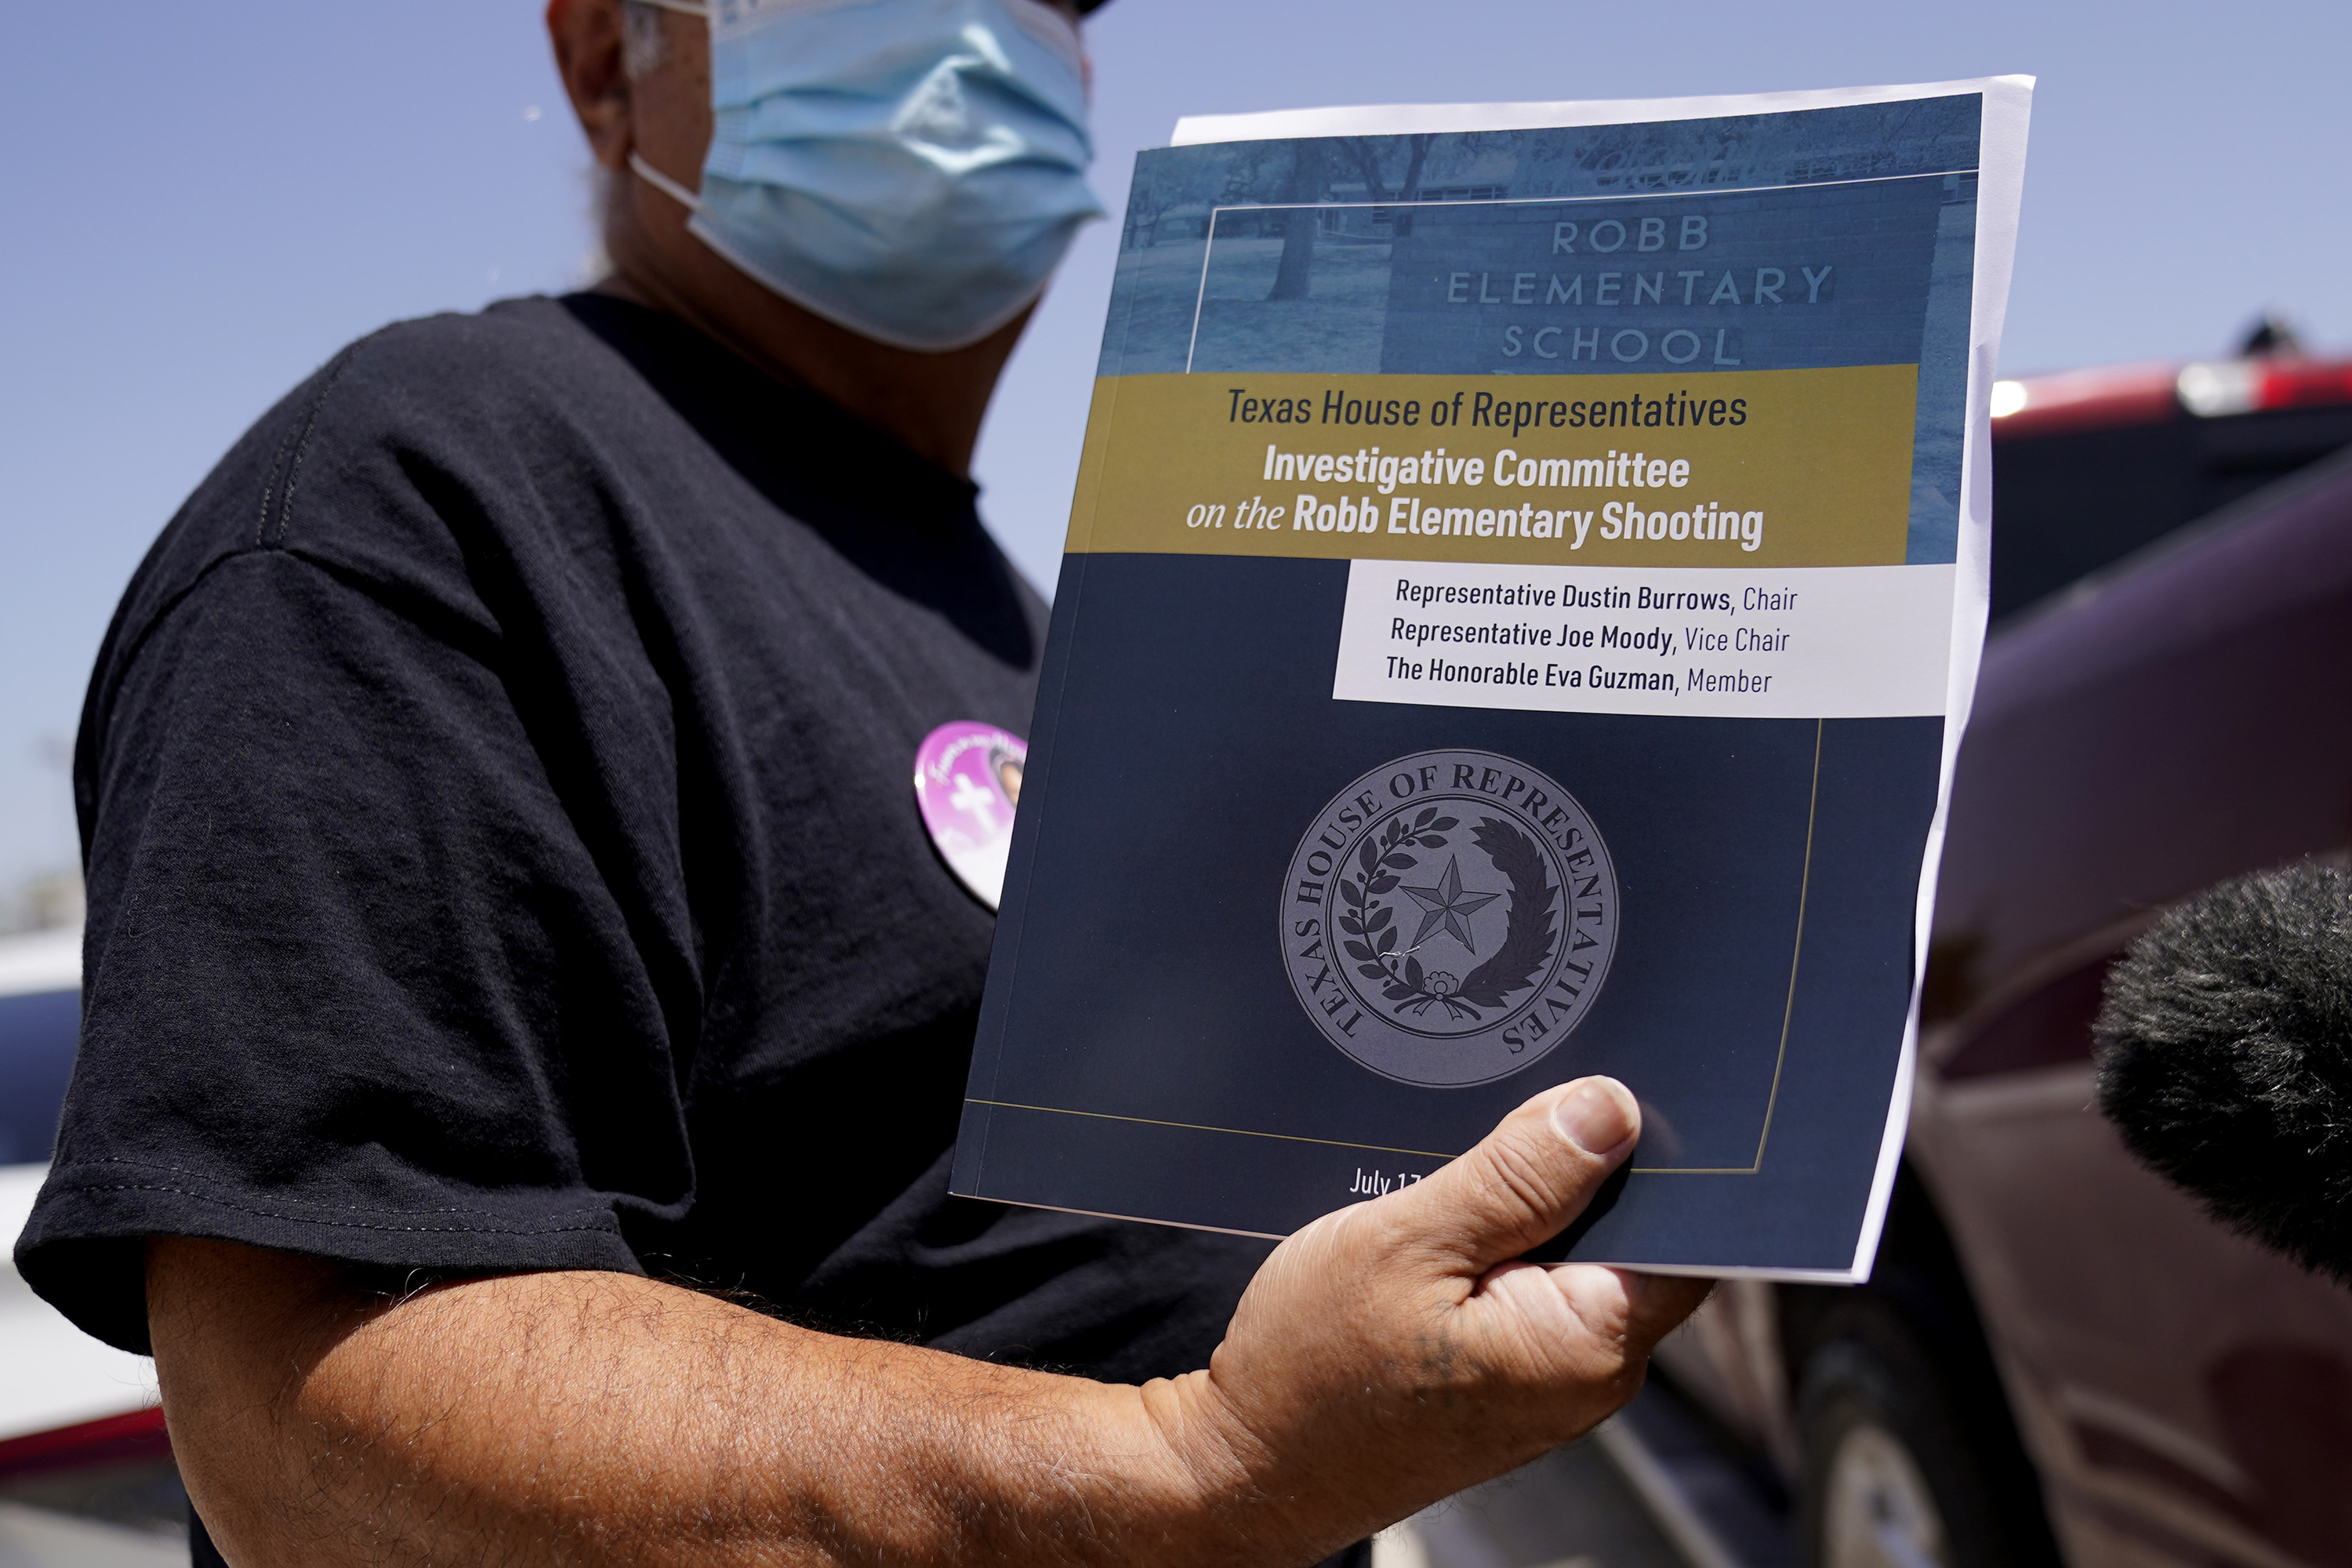 Vincent Salazar, grandfather of Layla Salazar who was killed in the school shooting at Robb Elementary, holds a report released by the Texas House investigative committee on the shootings at Robb Elementary School on Sunday, July 17, in Uvalde, Texas.